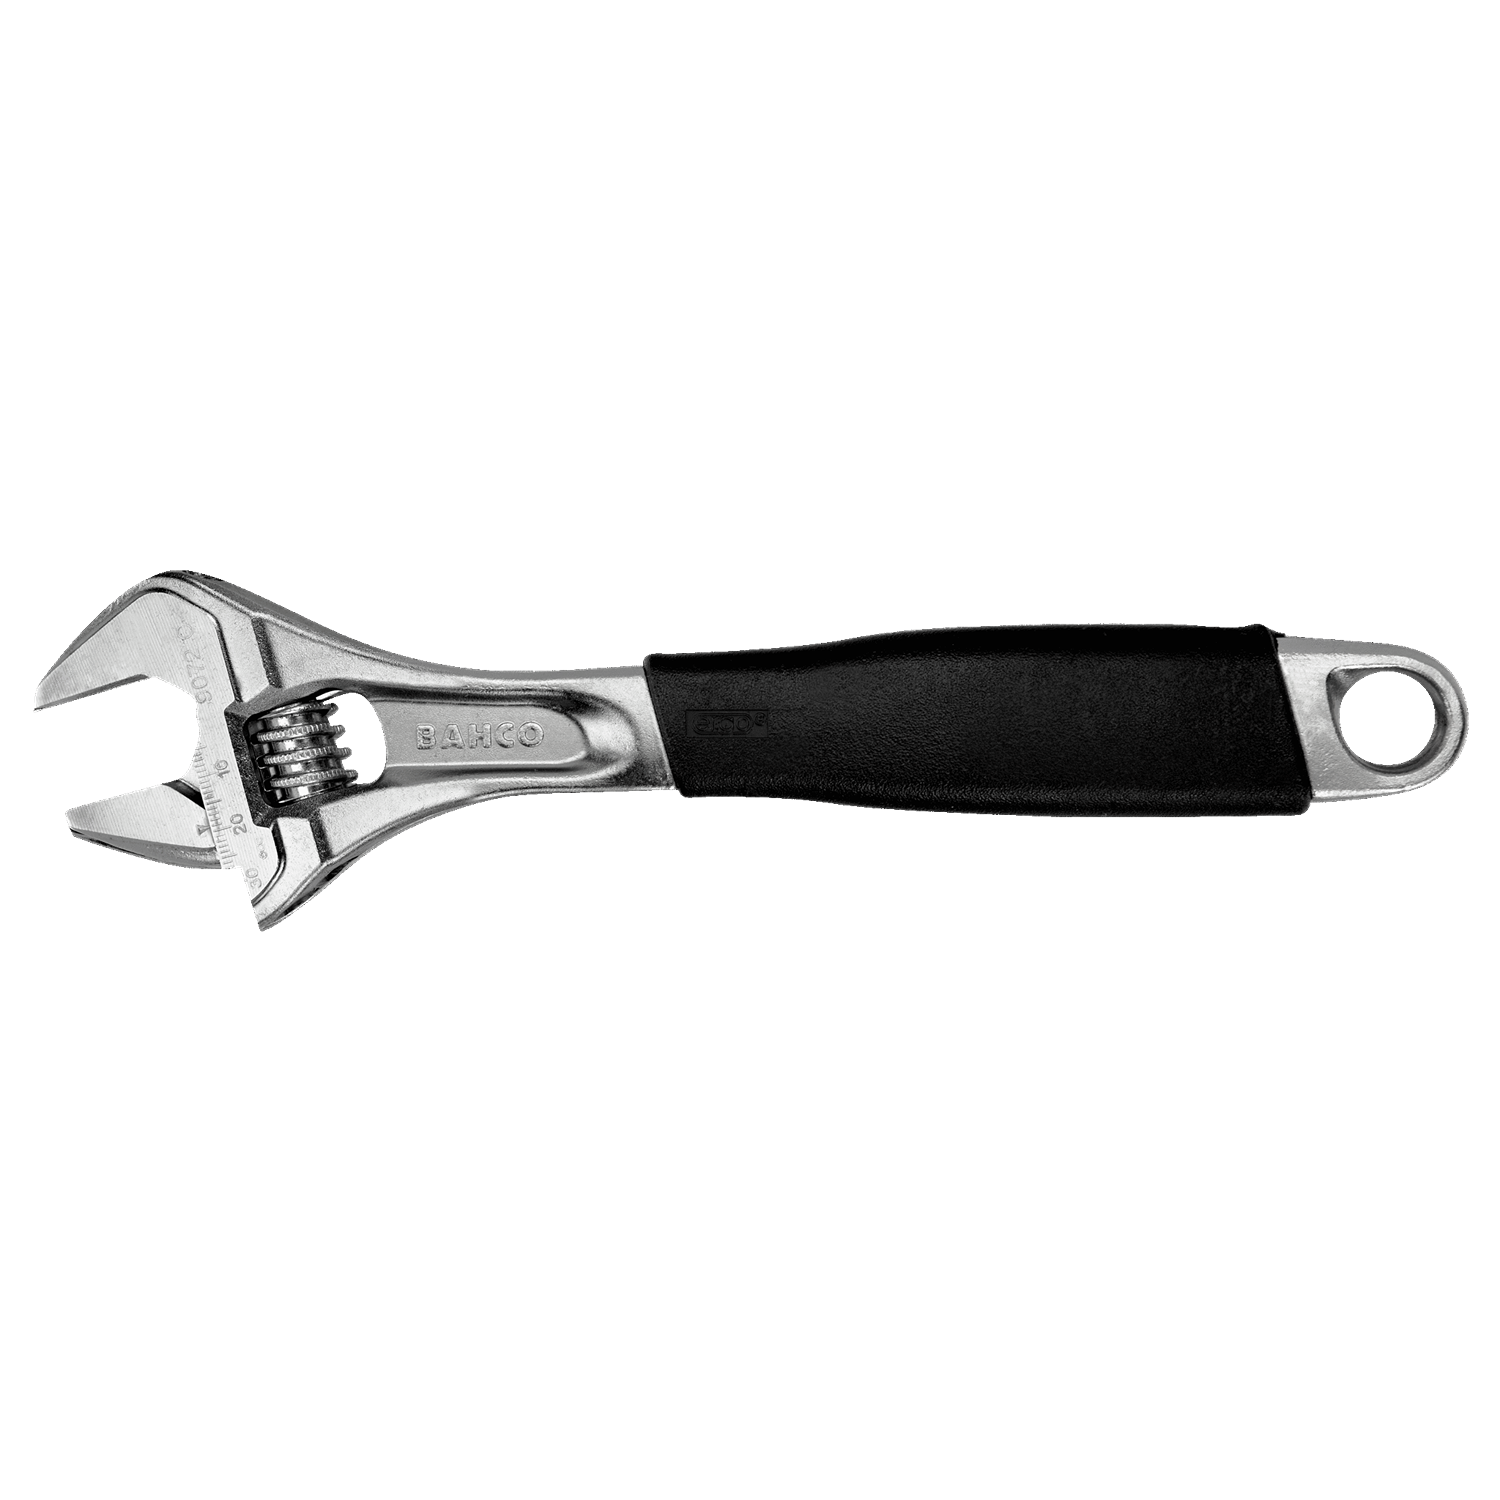 BAHCO 90C ERGO Central Nut Adjustable Wrench with Chrome Finish - Premium Adjustable Wrench from BAHCO - Shop now at Yew Aik.